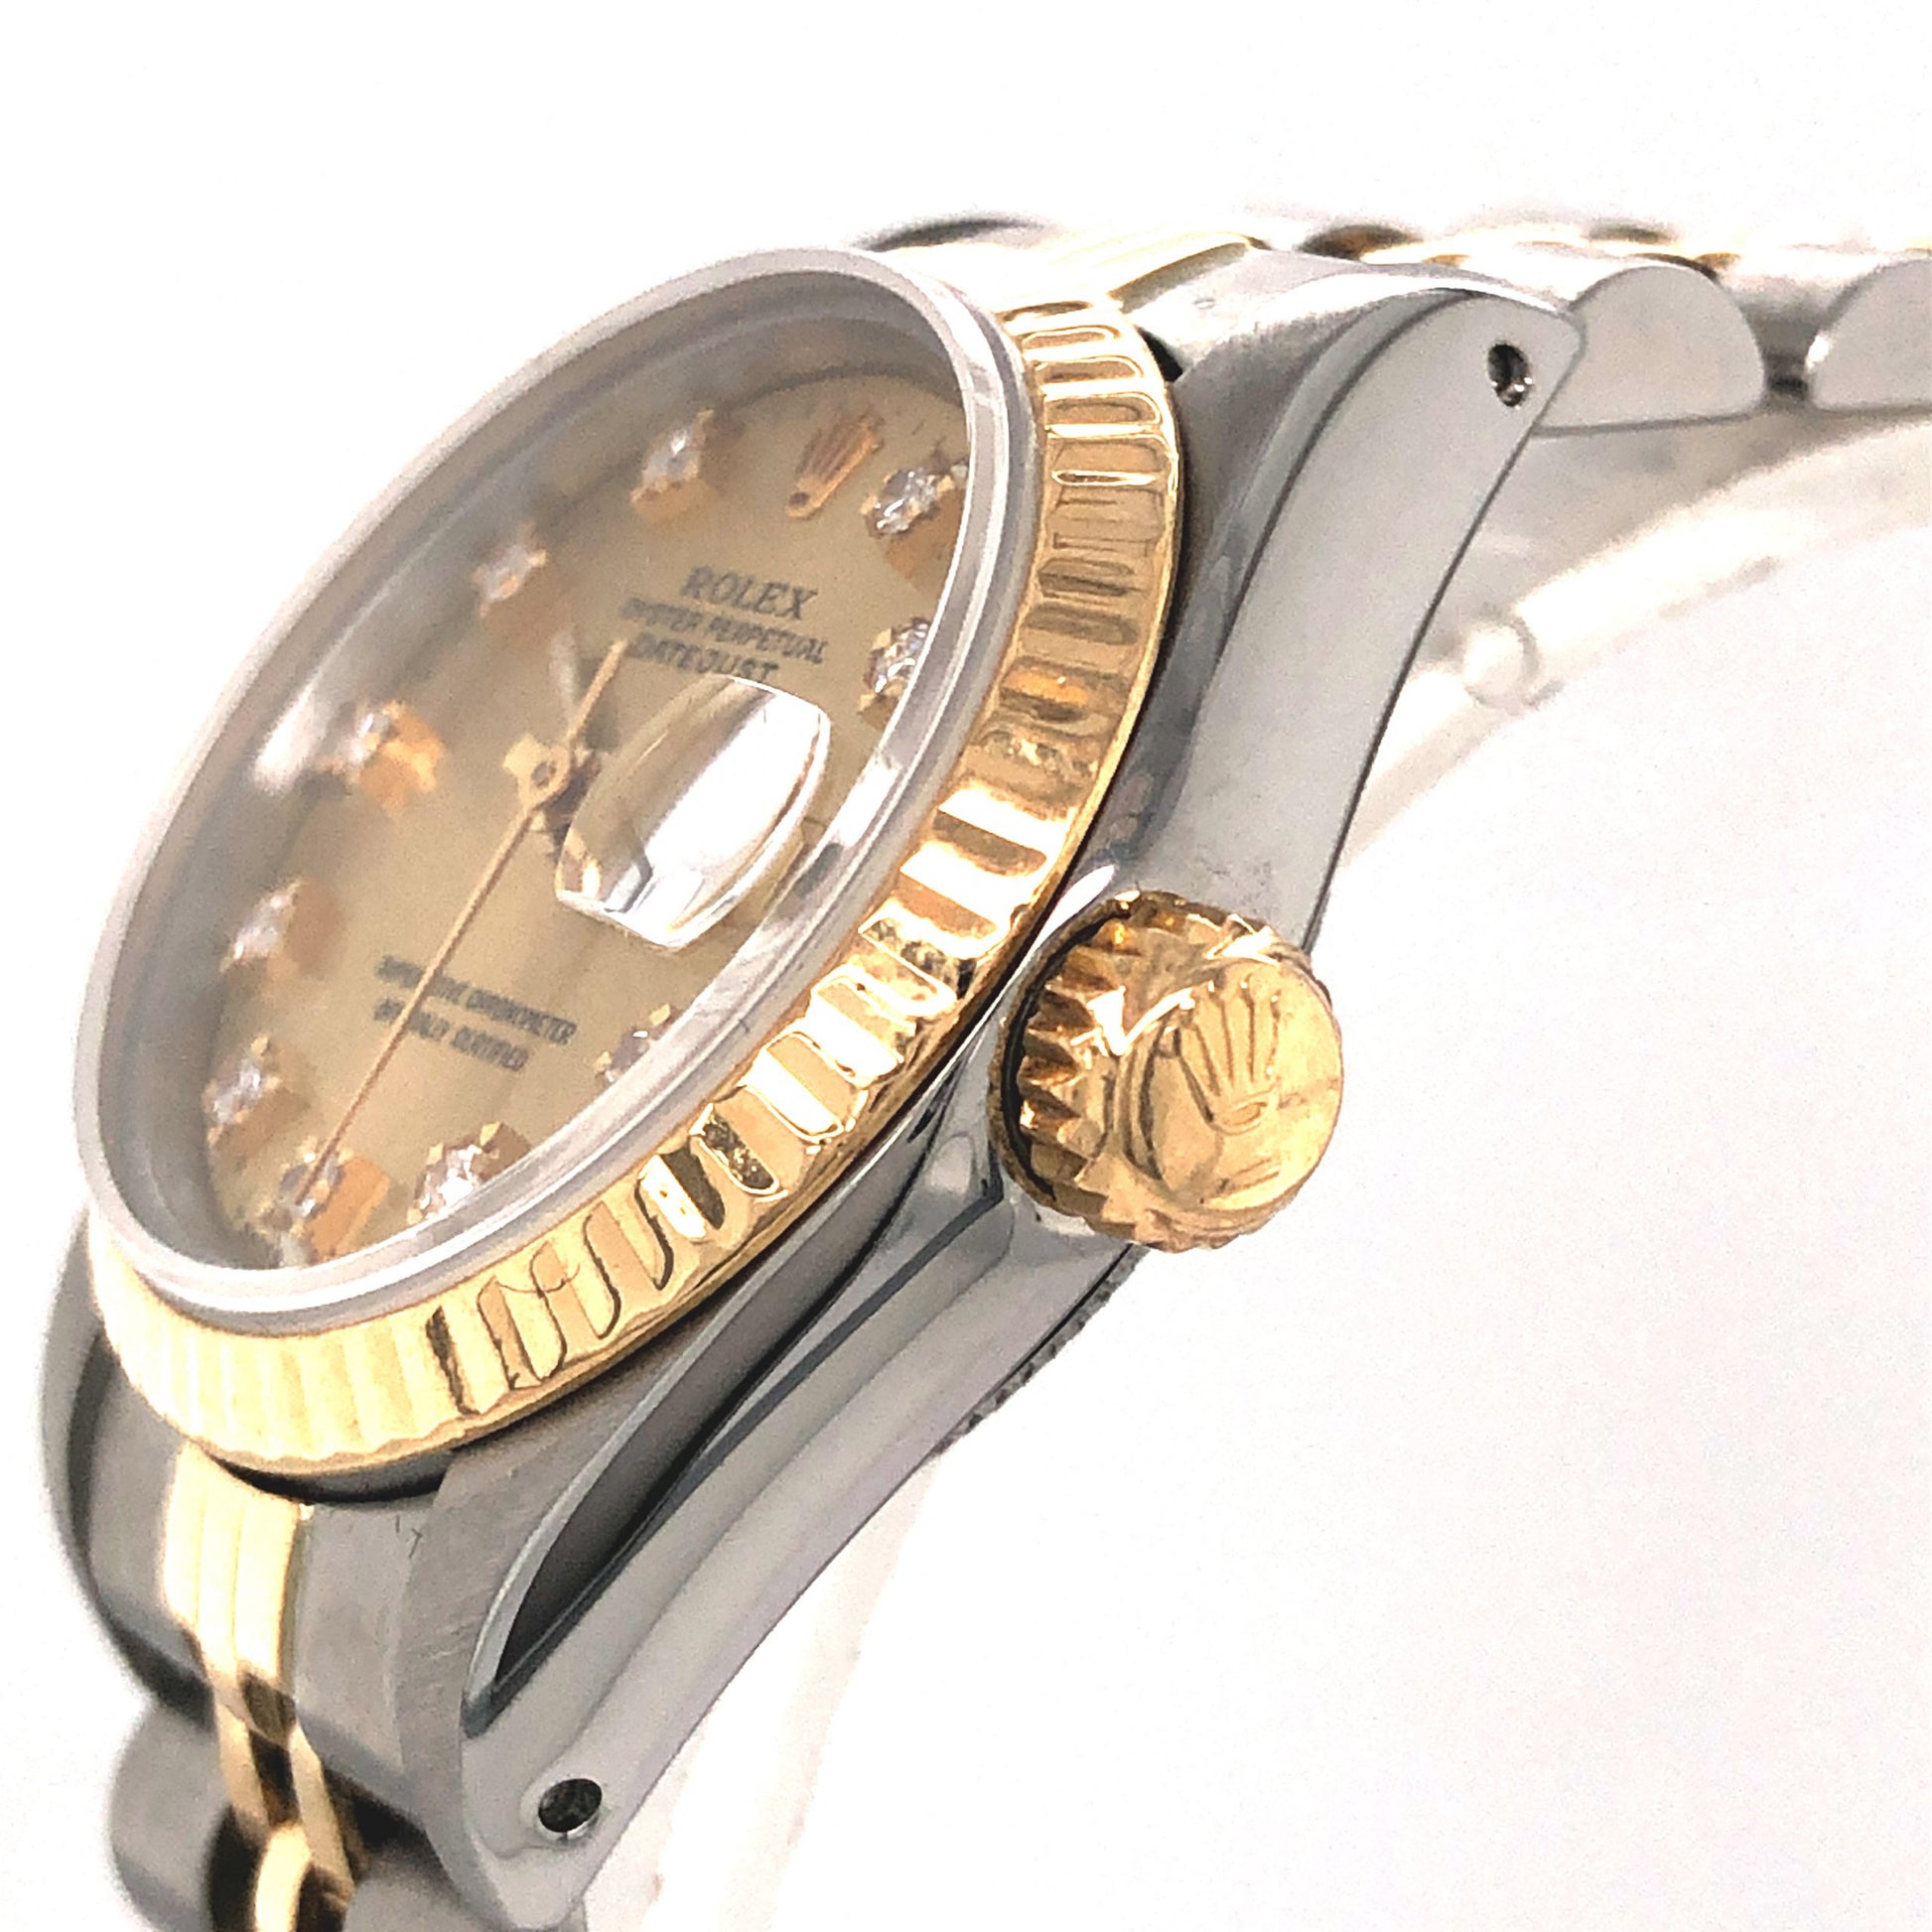 Ladies Rolex 2-Tone w/ Diamonds in 18k Yellow Gold & Stainless SteelComposition: Sterling Silver/18 Karat Yellow GoldTotal Diamond Weight: .10 ctTotal Gram Weight: 54.8 g